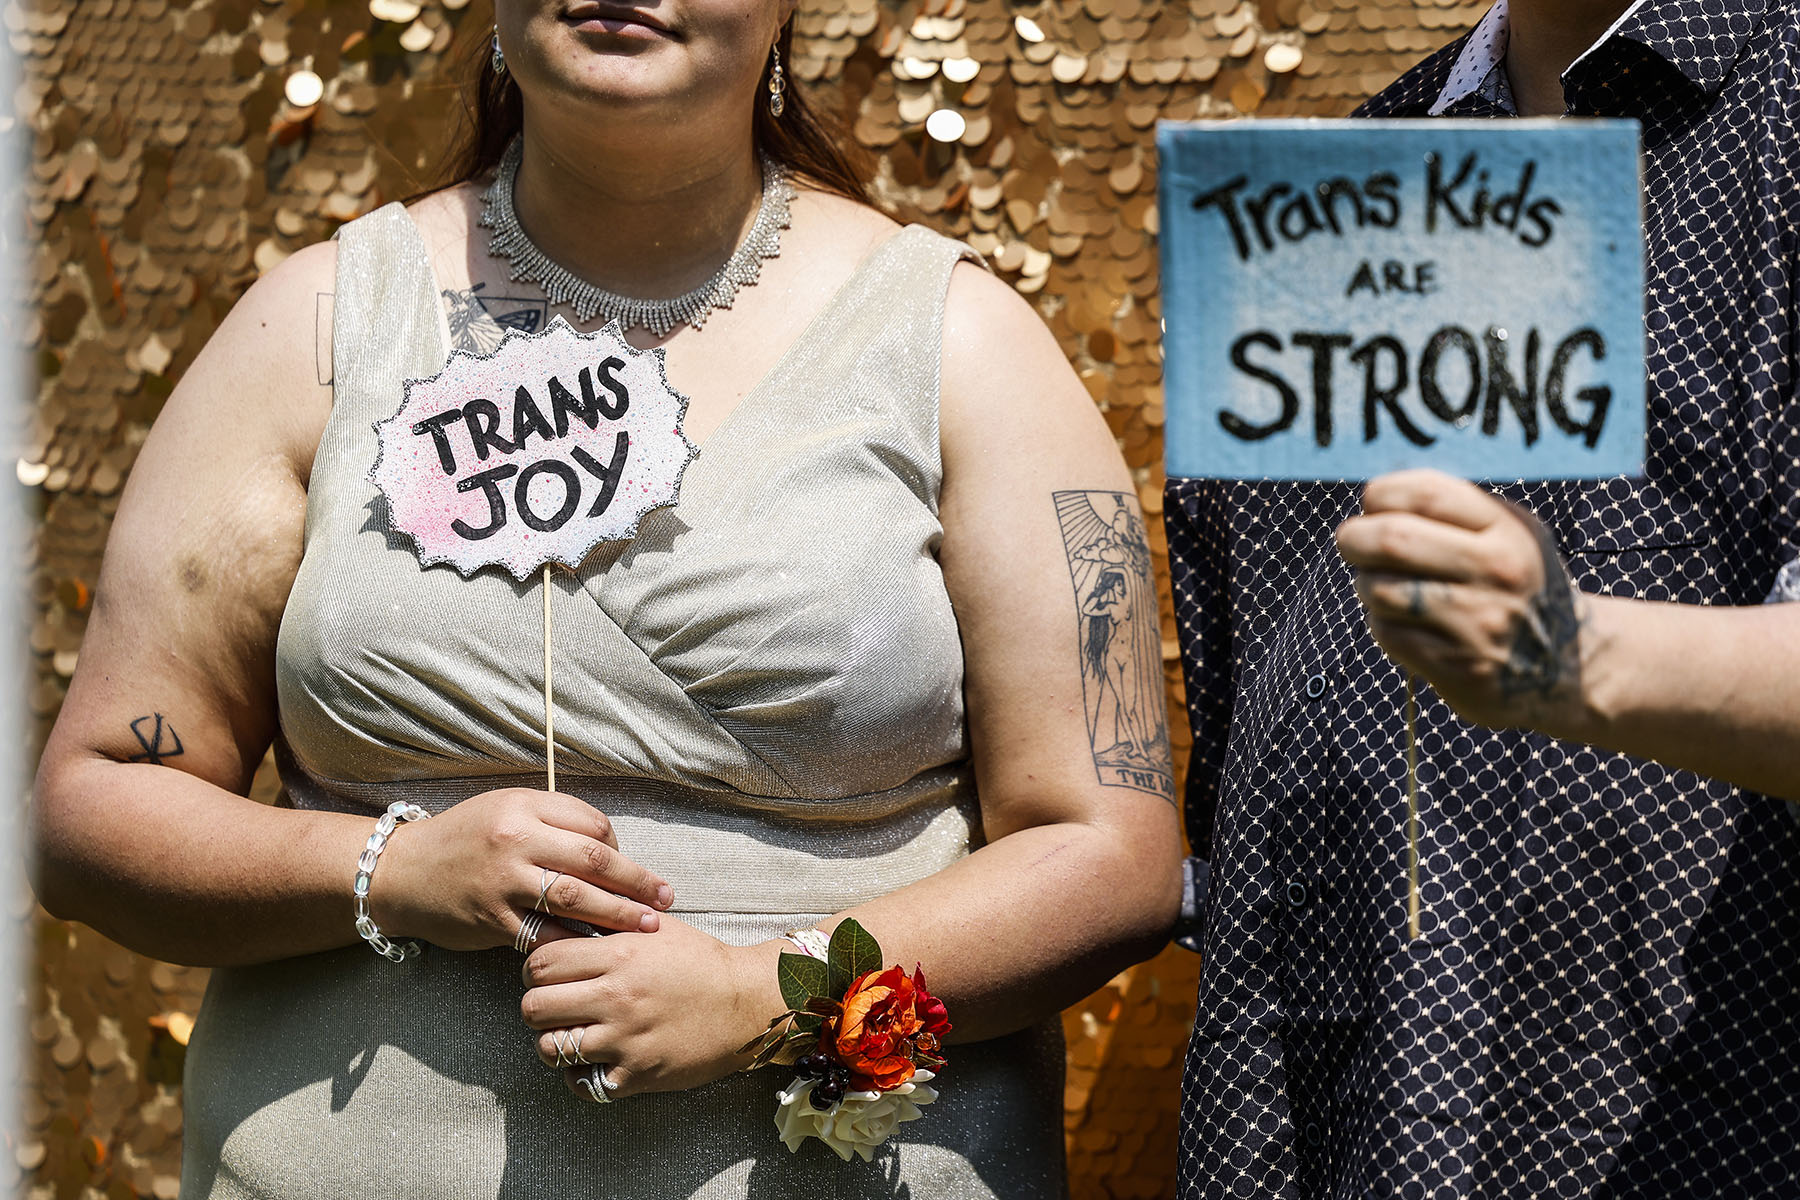 People hold up signs as they have their picture taken at a photo booth during a "Trans Youth Prom" event on Capitol Hill.